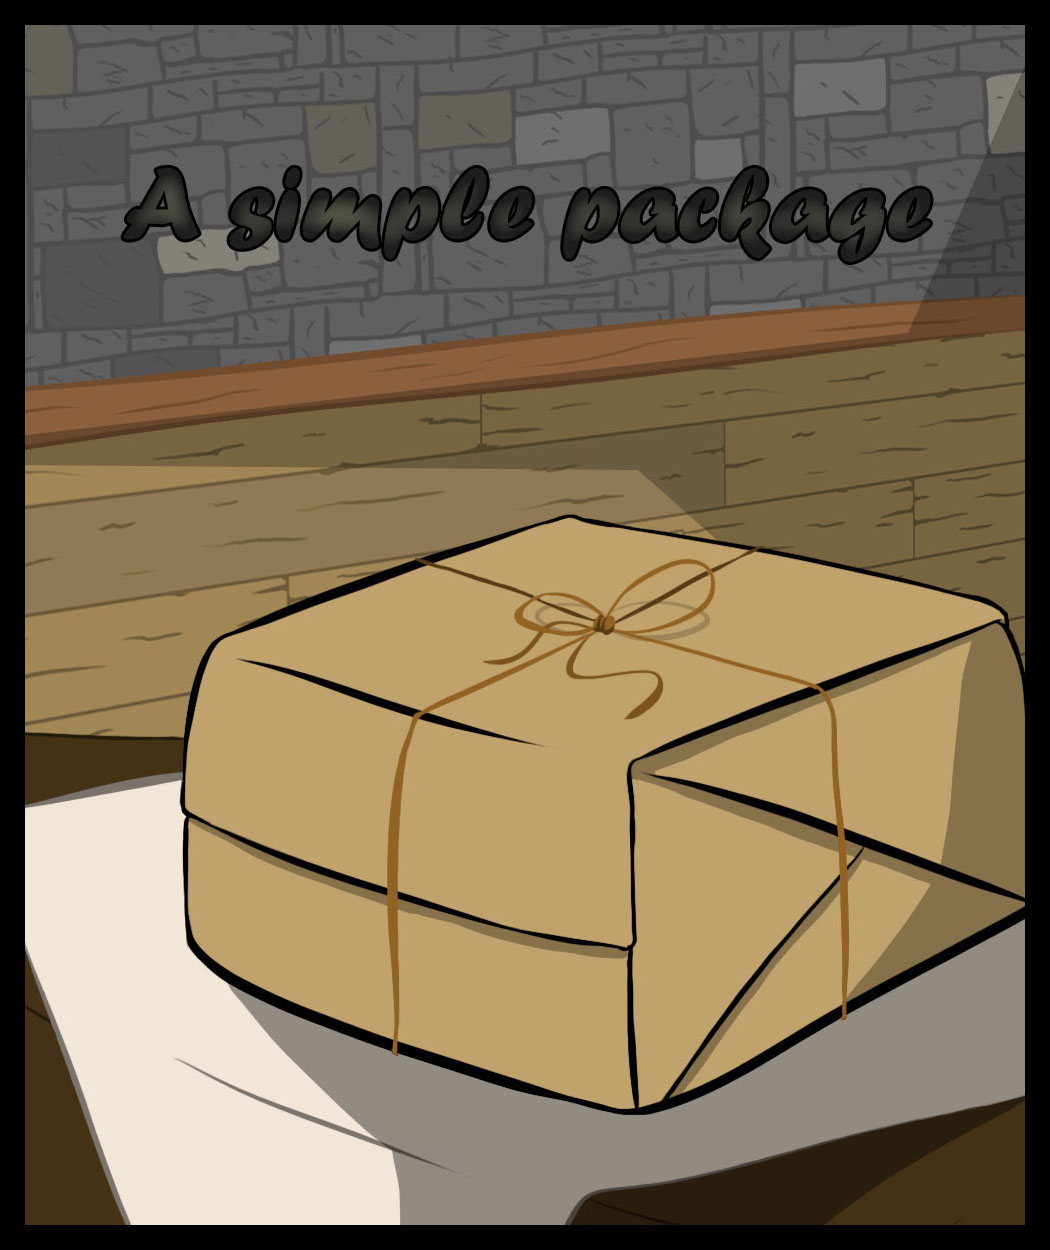 A simple package